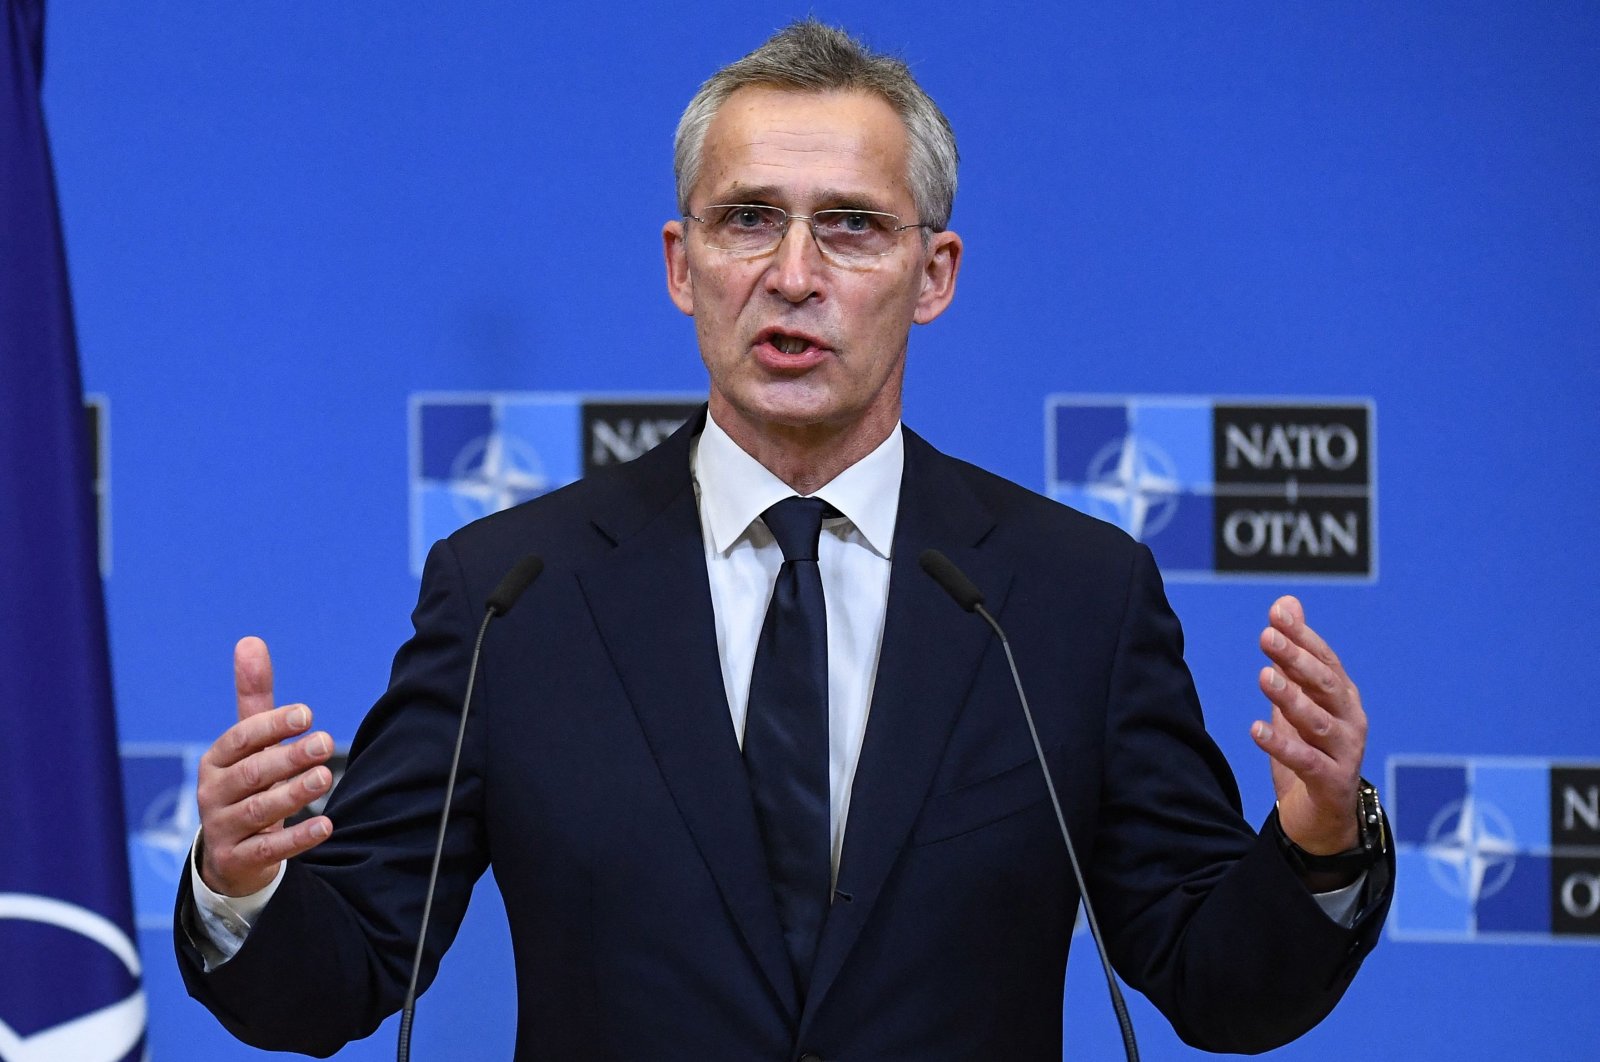 NATO Secretary-General Jens Stoltenberg gives a press conference with new German Chancellor Olaf Scholz (not pictured) after their bilateral meeting at the NATO headquarters in Brussels, Belgium, Dec. 10, 2021. (AFP Photo)